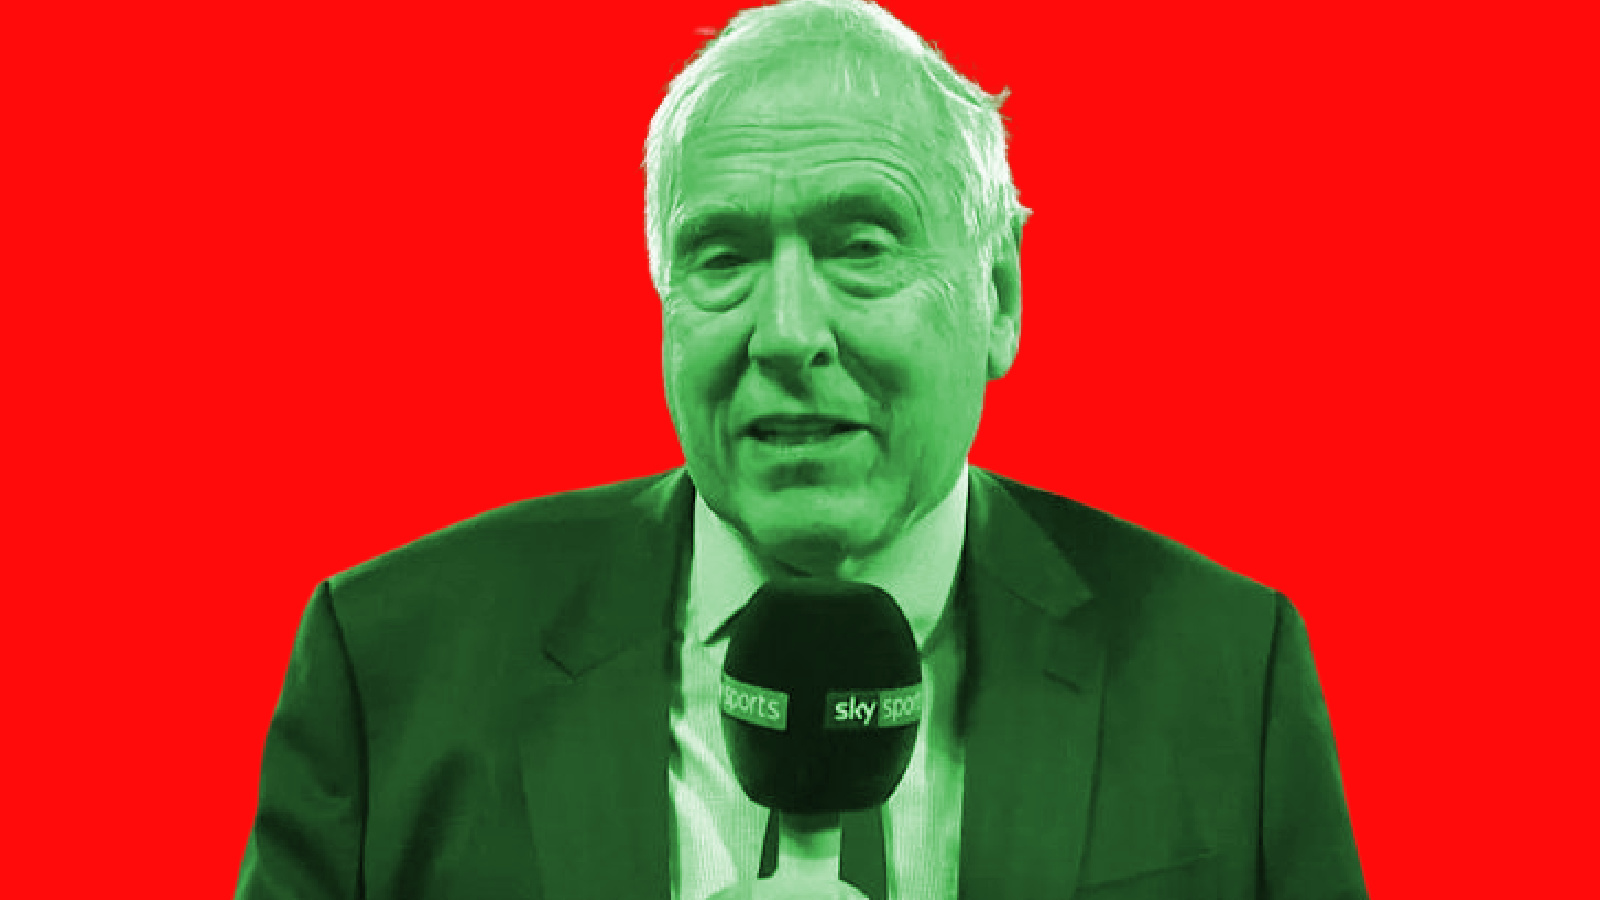 Sky Sports Warn Martin Tyler for Comparing Son Heung-min’s Foul to Martial Arts